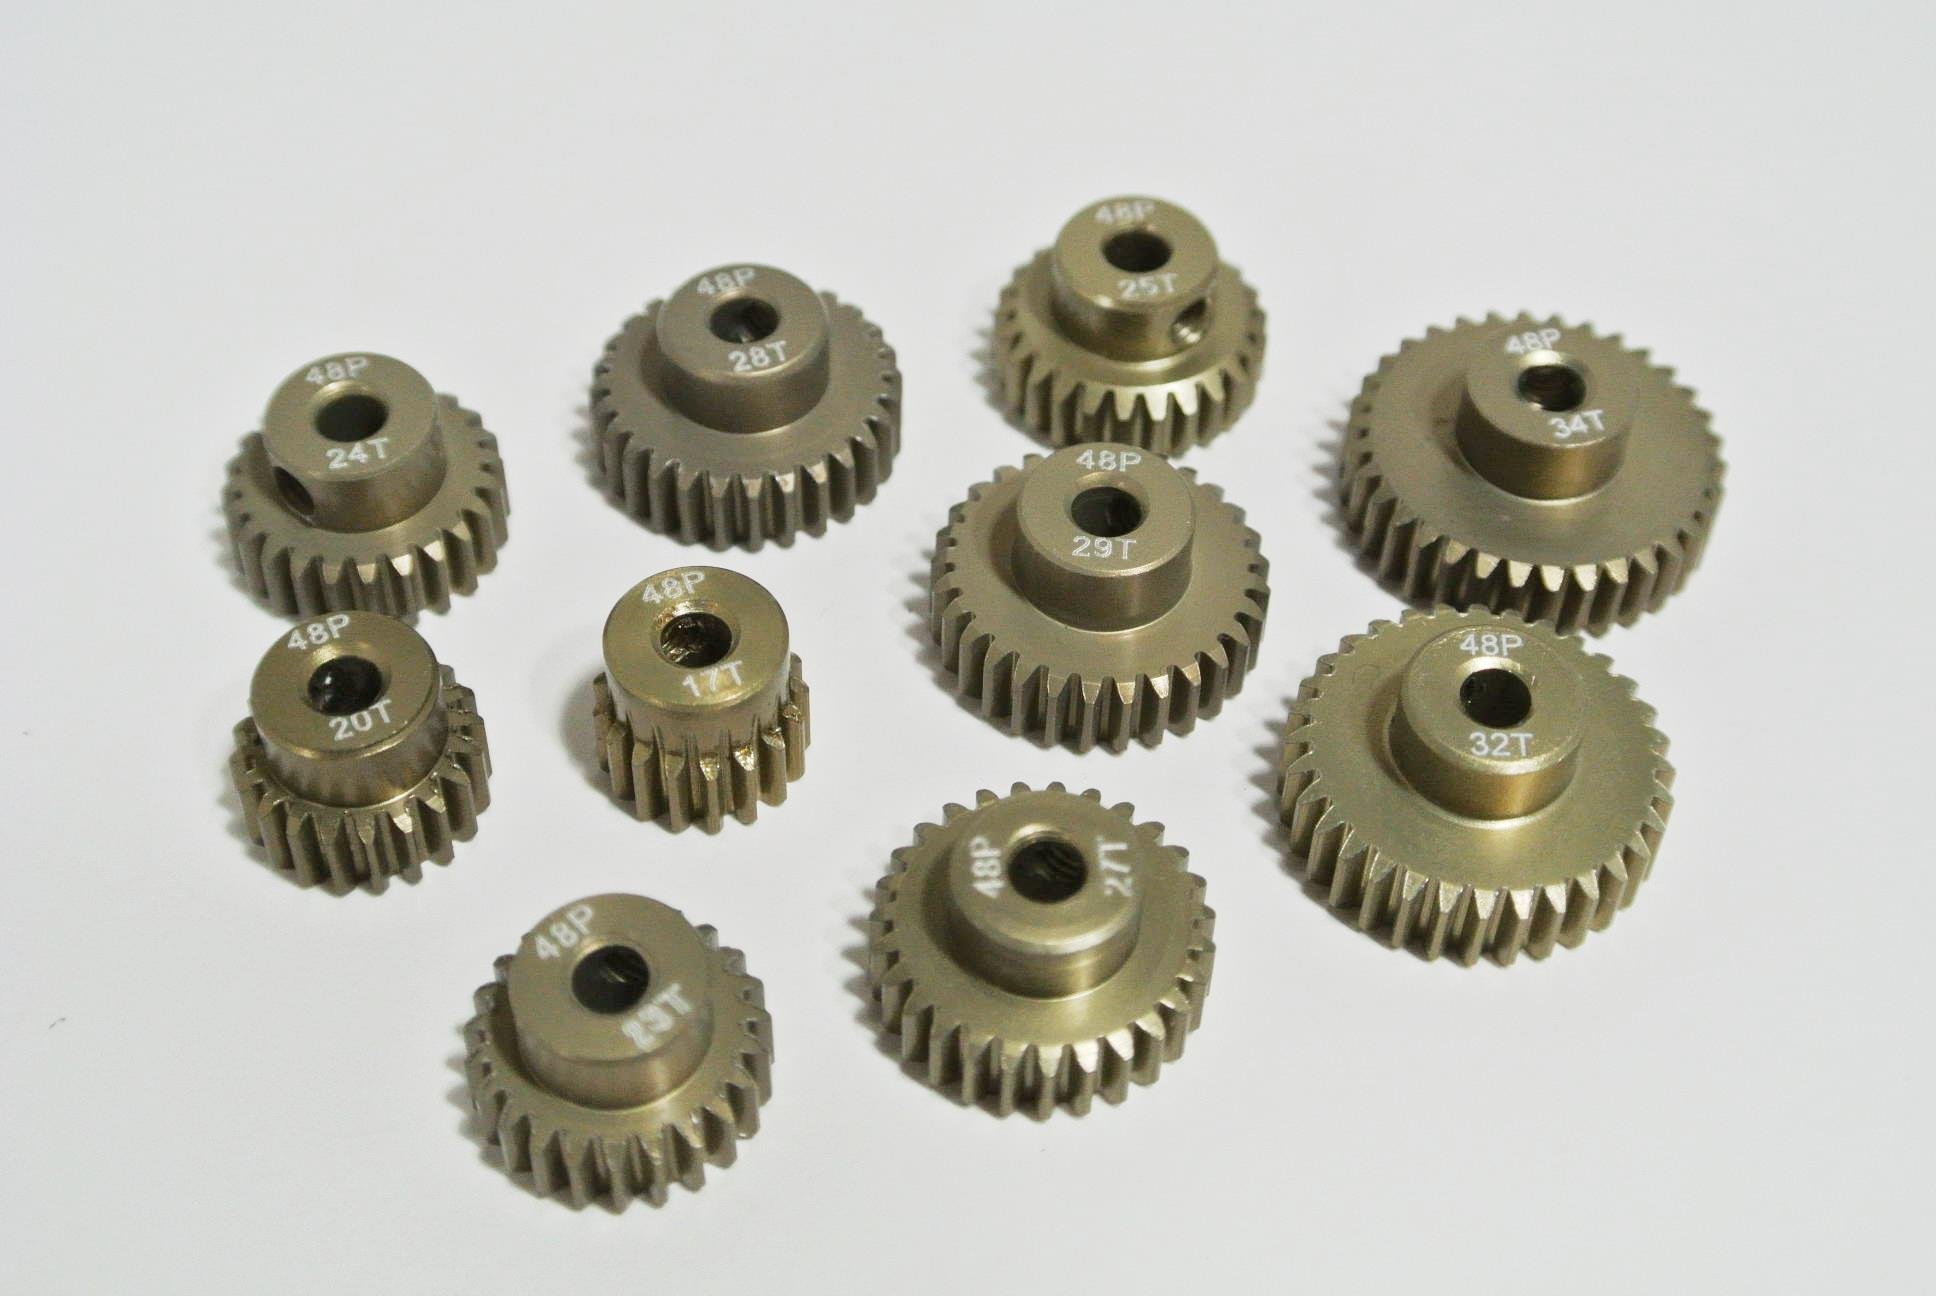 WEISHUJI 4PCS 48P Pinion Gear Set 28T 29T 30T 31T 48P Pinion Gear Set with Screw Driver for Motors with 1/8 Output Shaft Aluminum Pinion Gear Set 